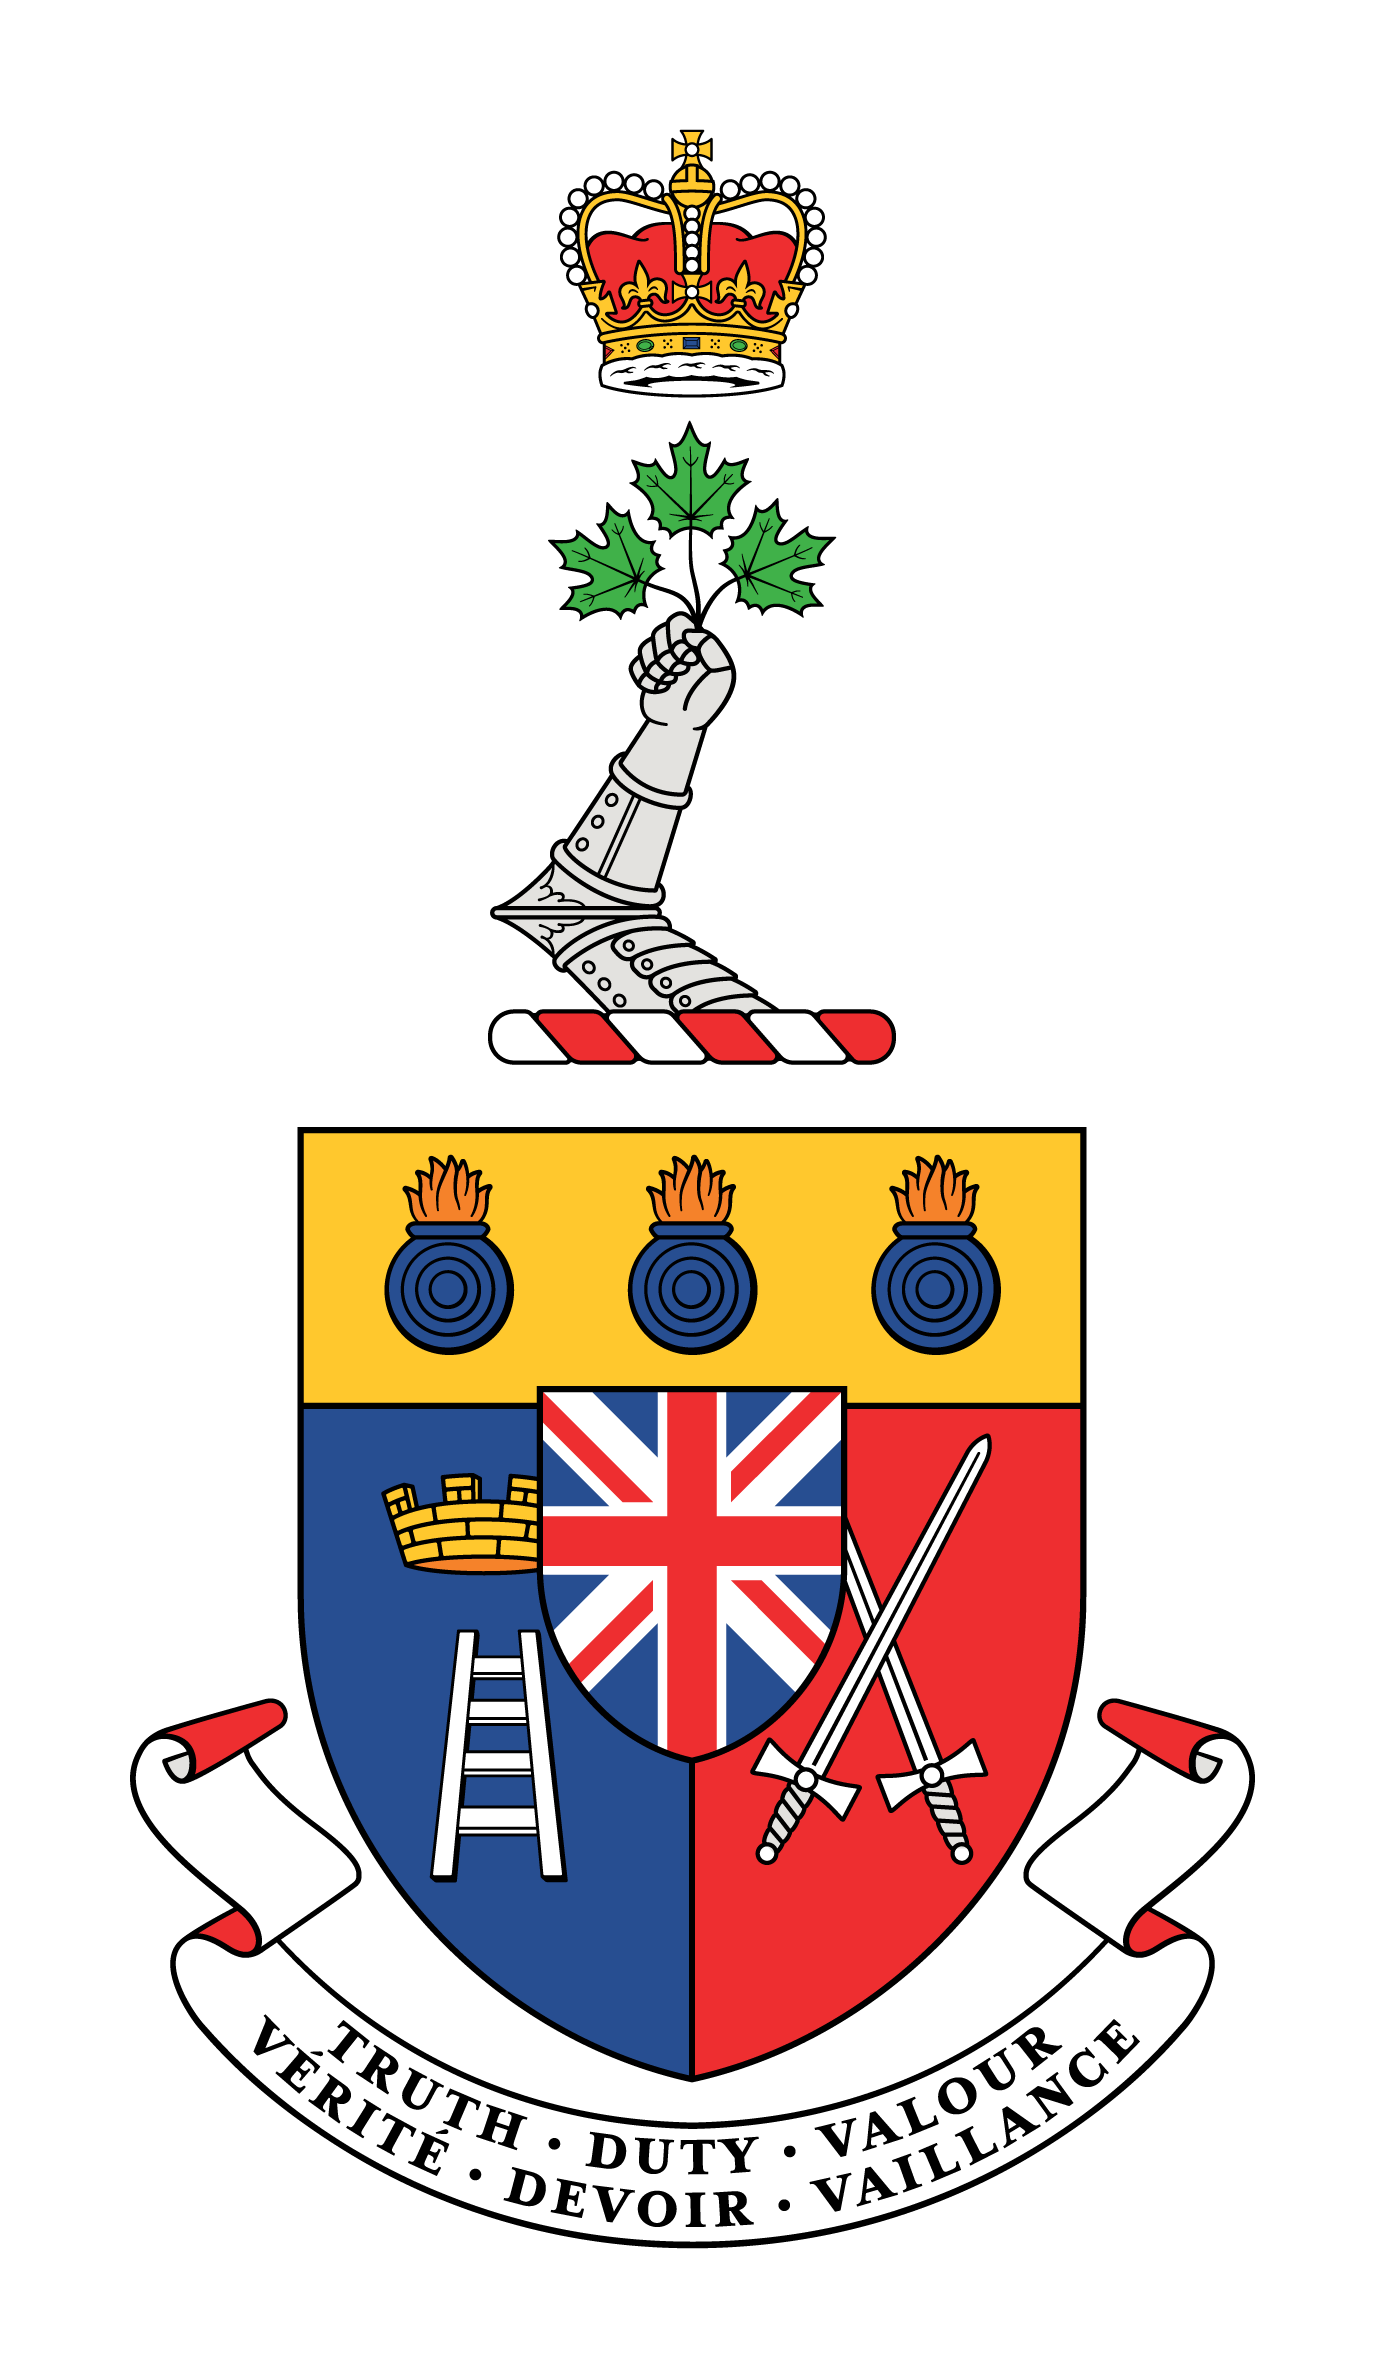 the Royal Military College of Canada's coat of arms